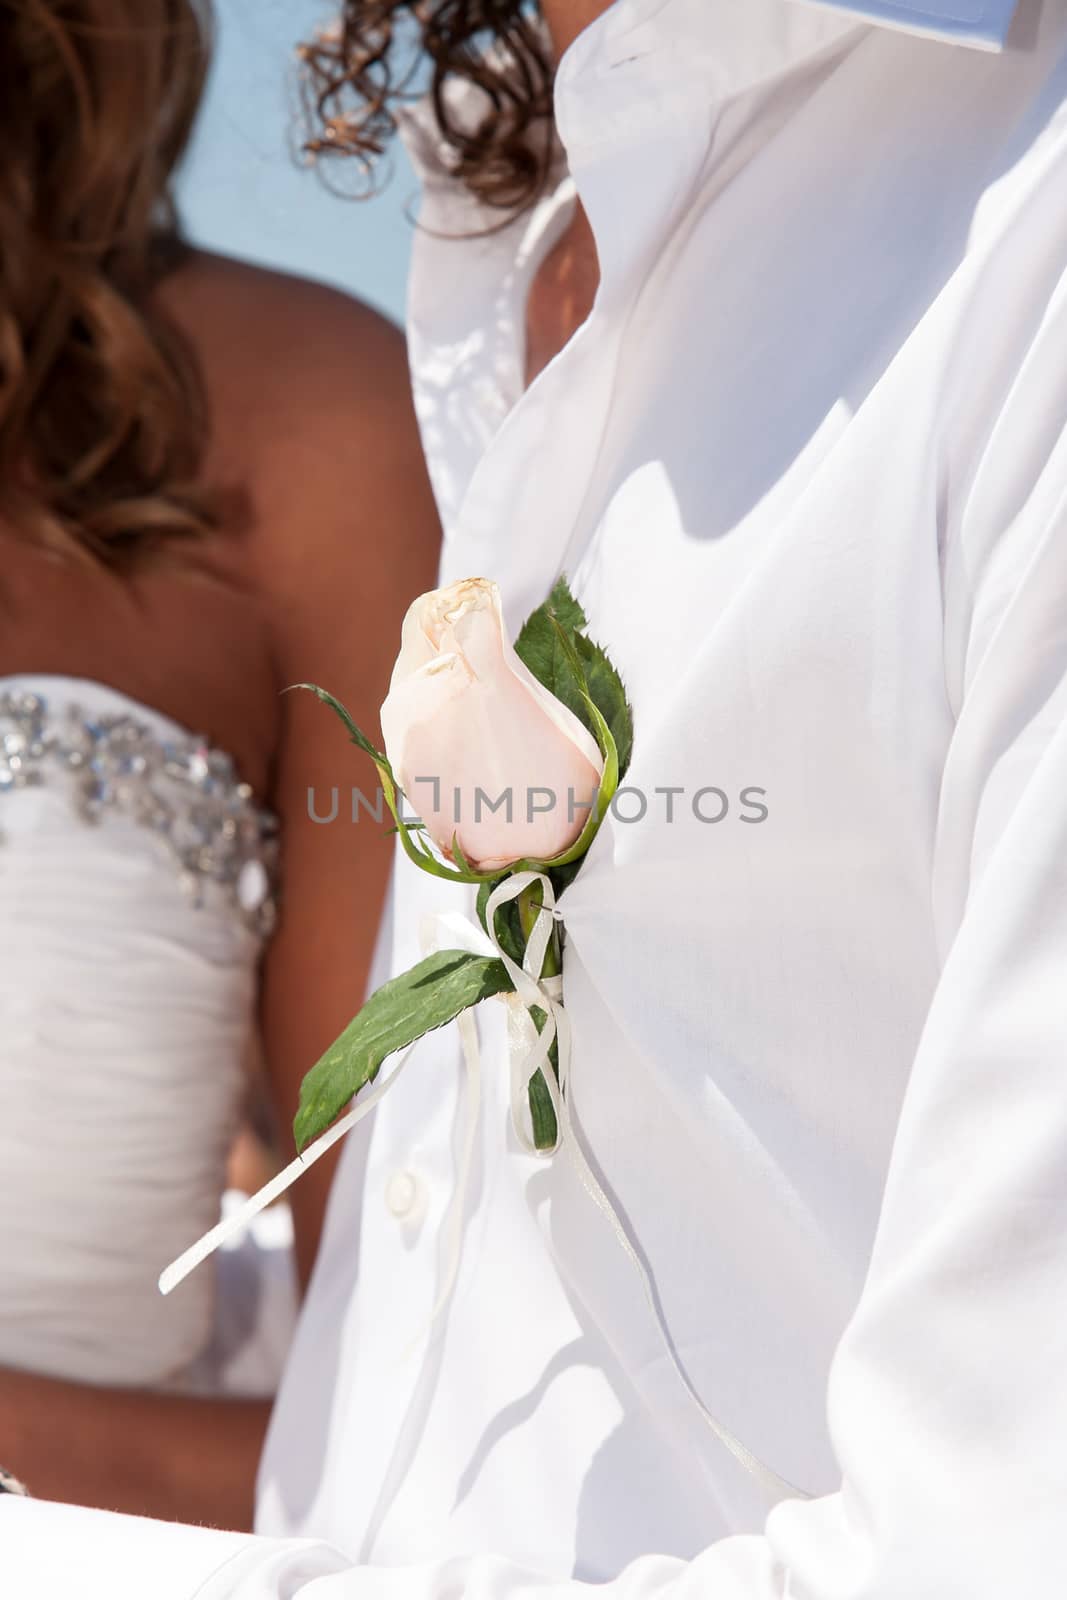 close up of a rose on a groom's shirt at the wedding